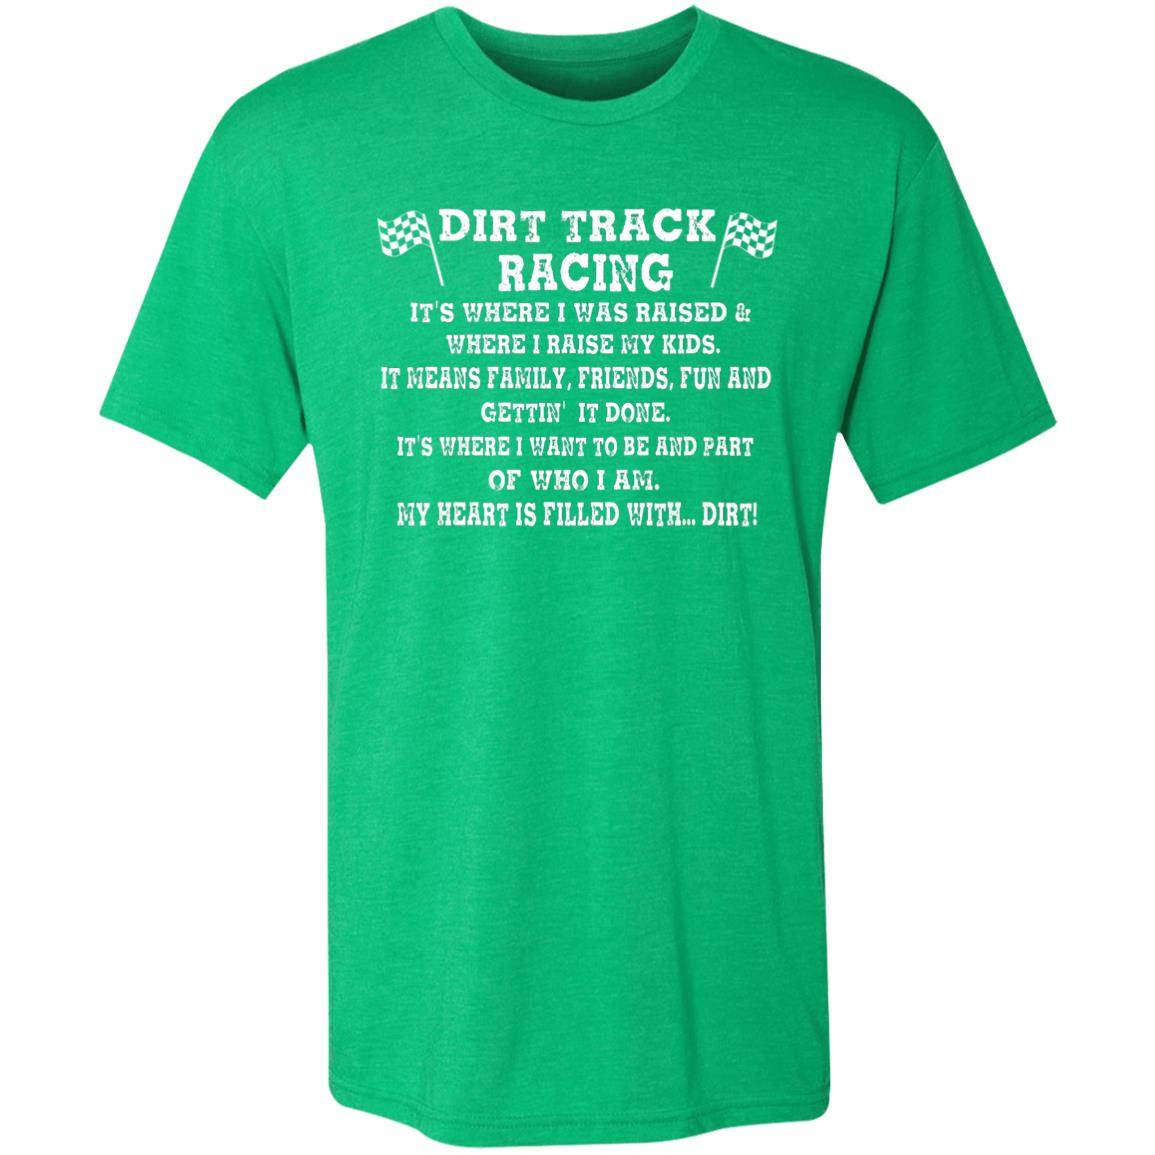 Dirt Track Racing It's Where I Was Raised Men's Triblend T-Shirt